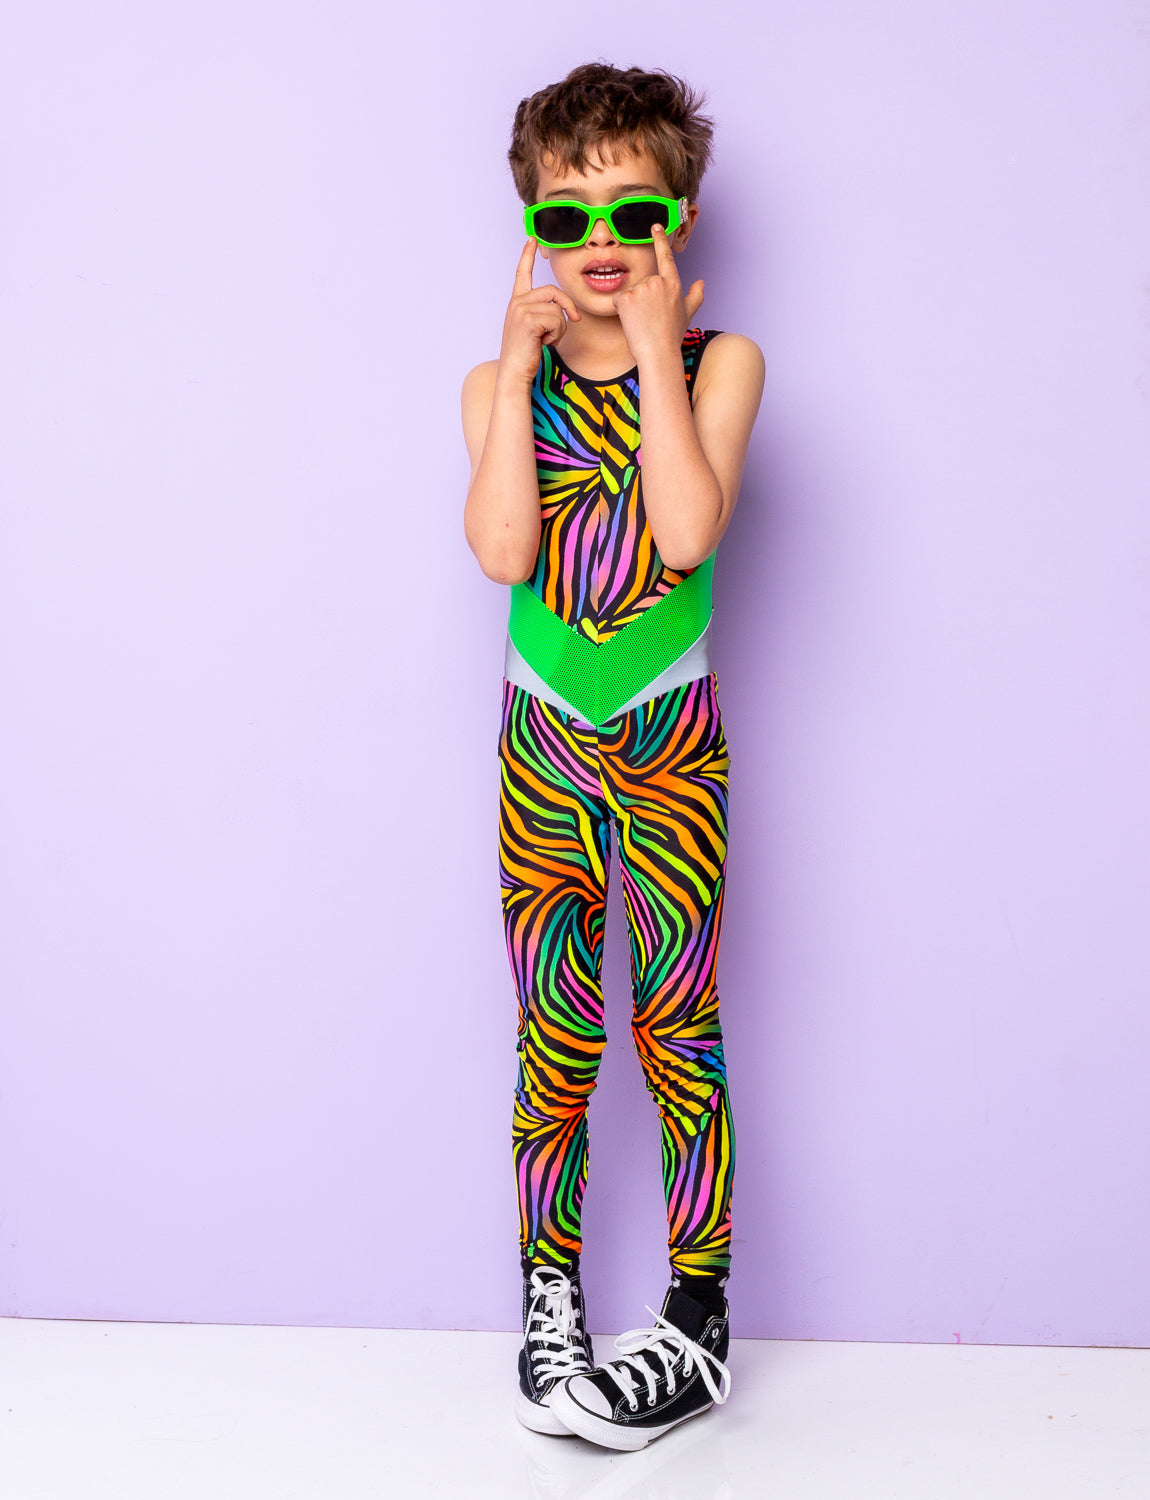 Boy modelling a multi coloured zebra print lycra catsuit and lime green sunglasses.